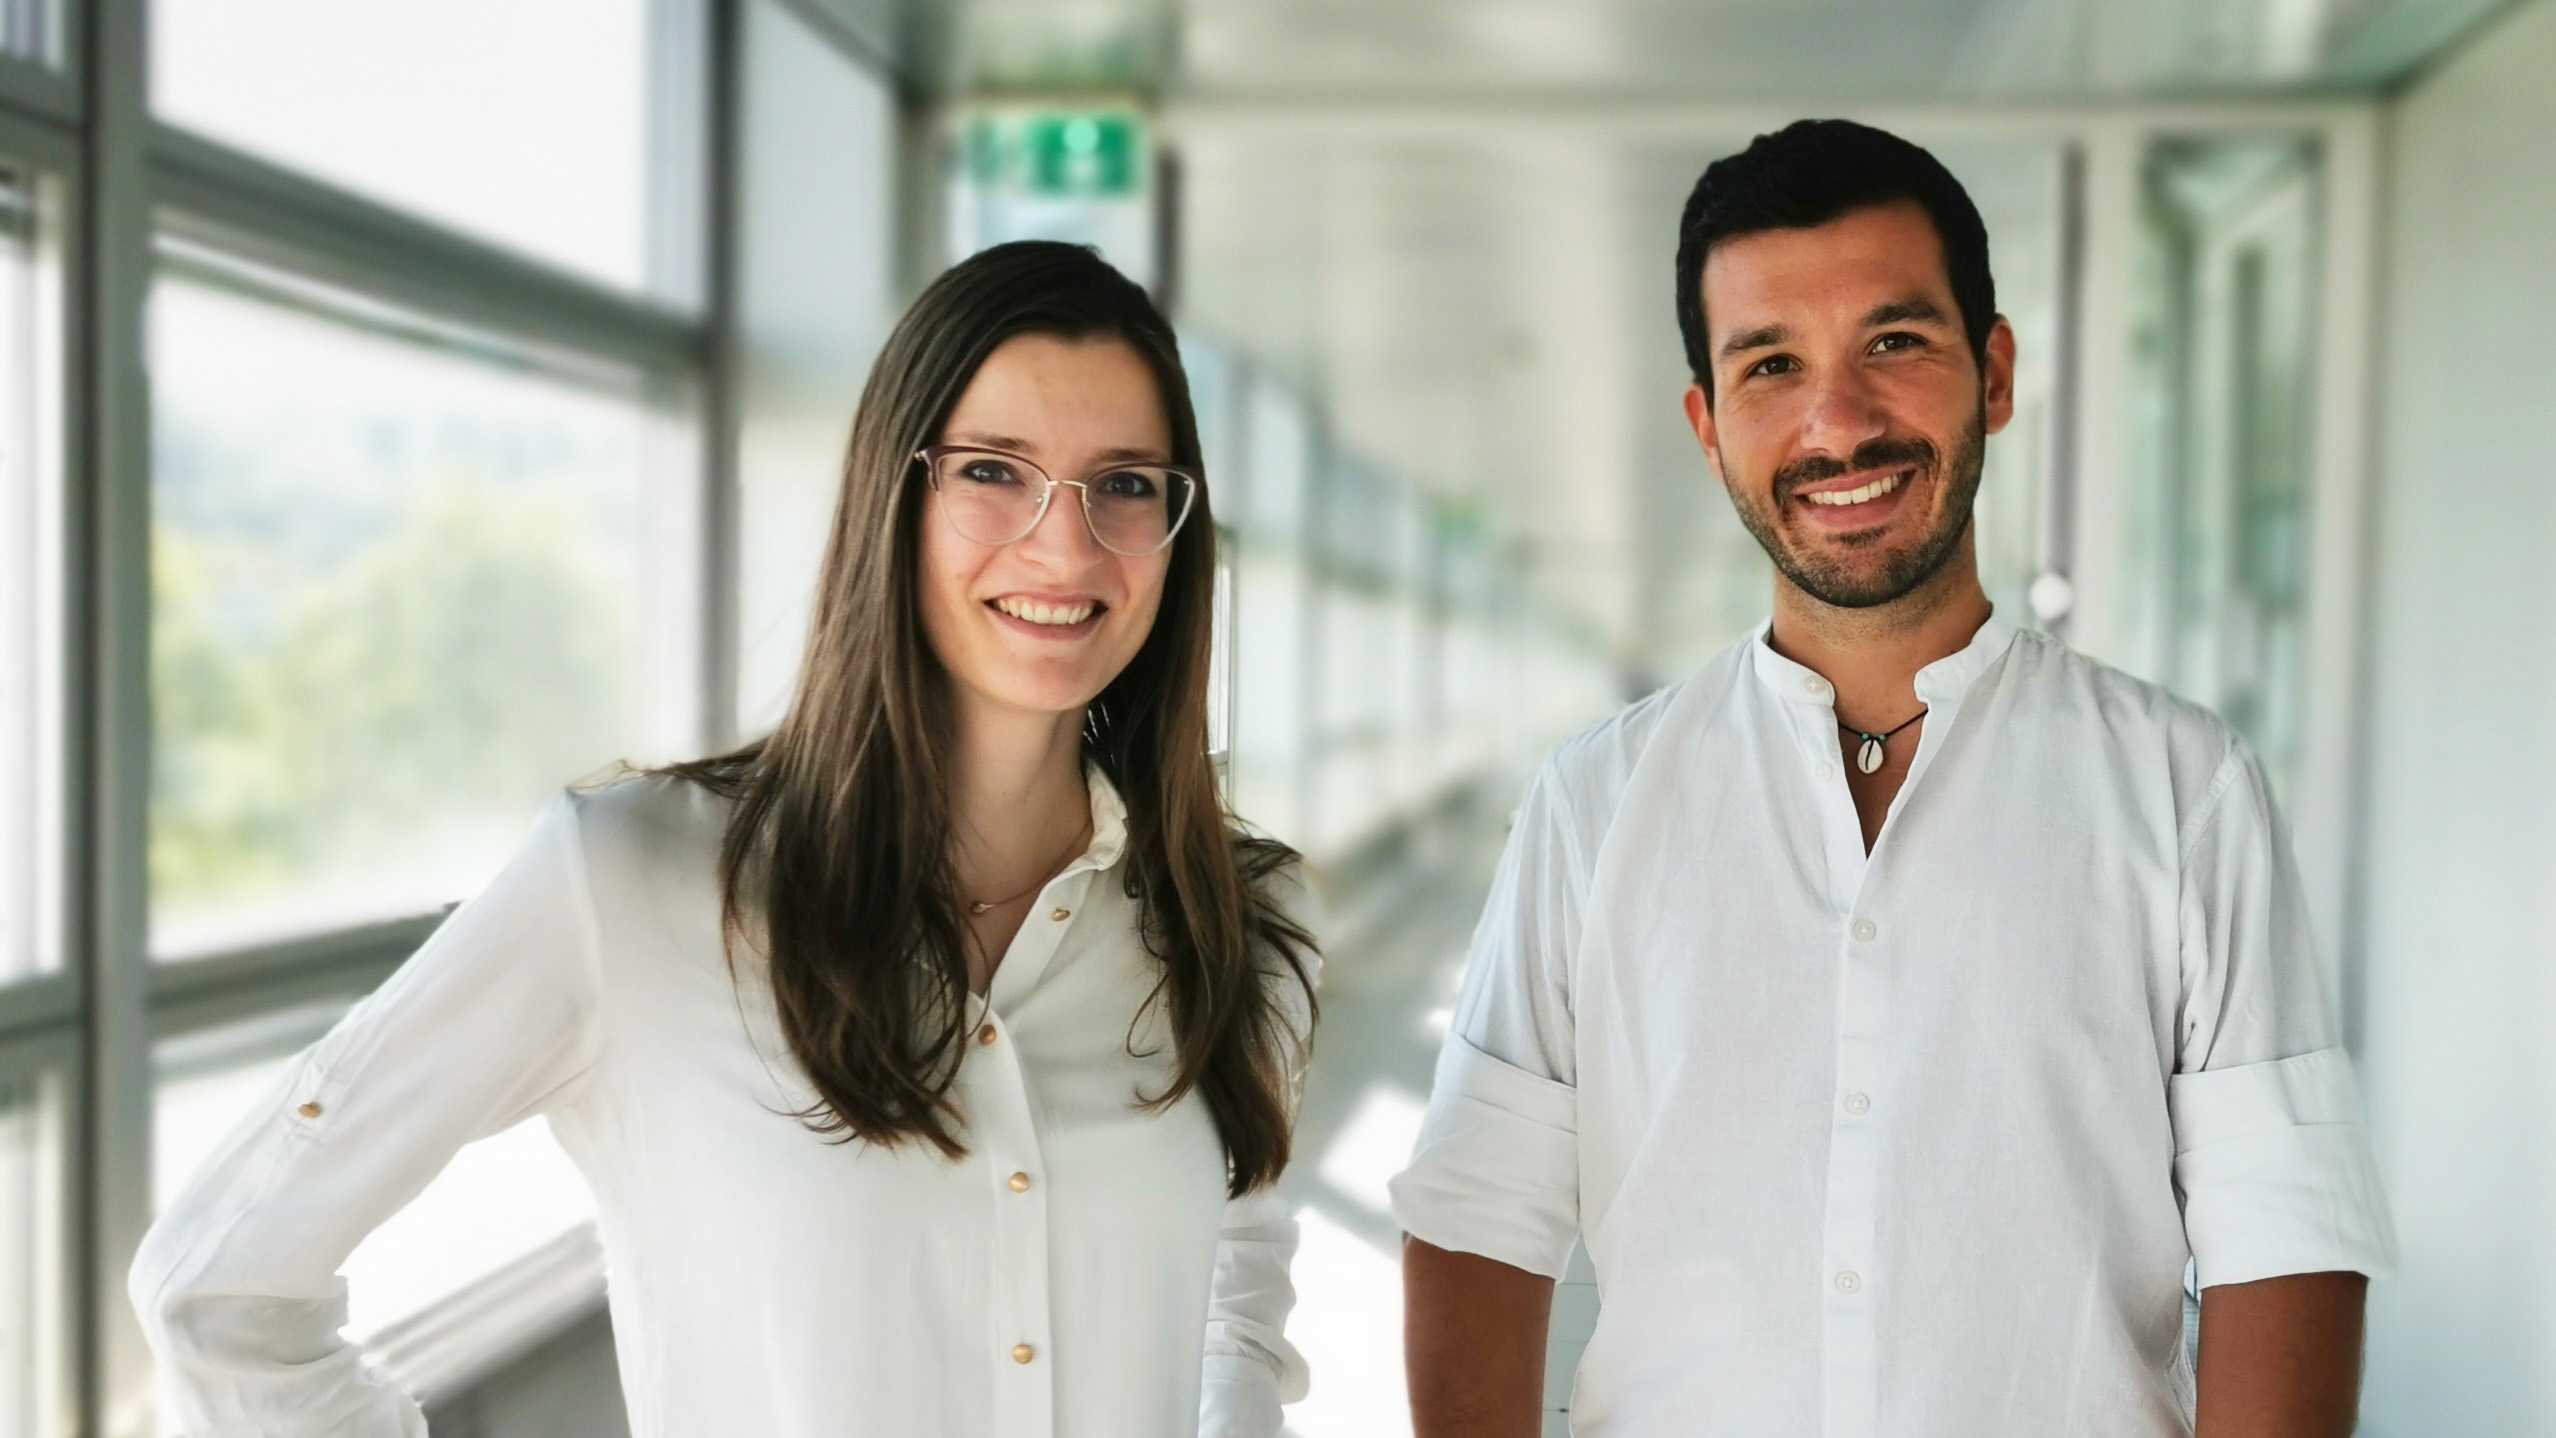 Nevena Paunović (ETH Pioneer Fellow) and David Klein Cerrejon (co-​founder) are founding Transire Bio - Painless alternative for delivery of injectable drugs.